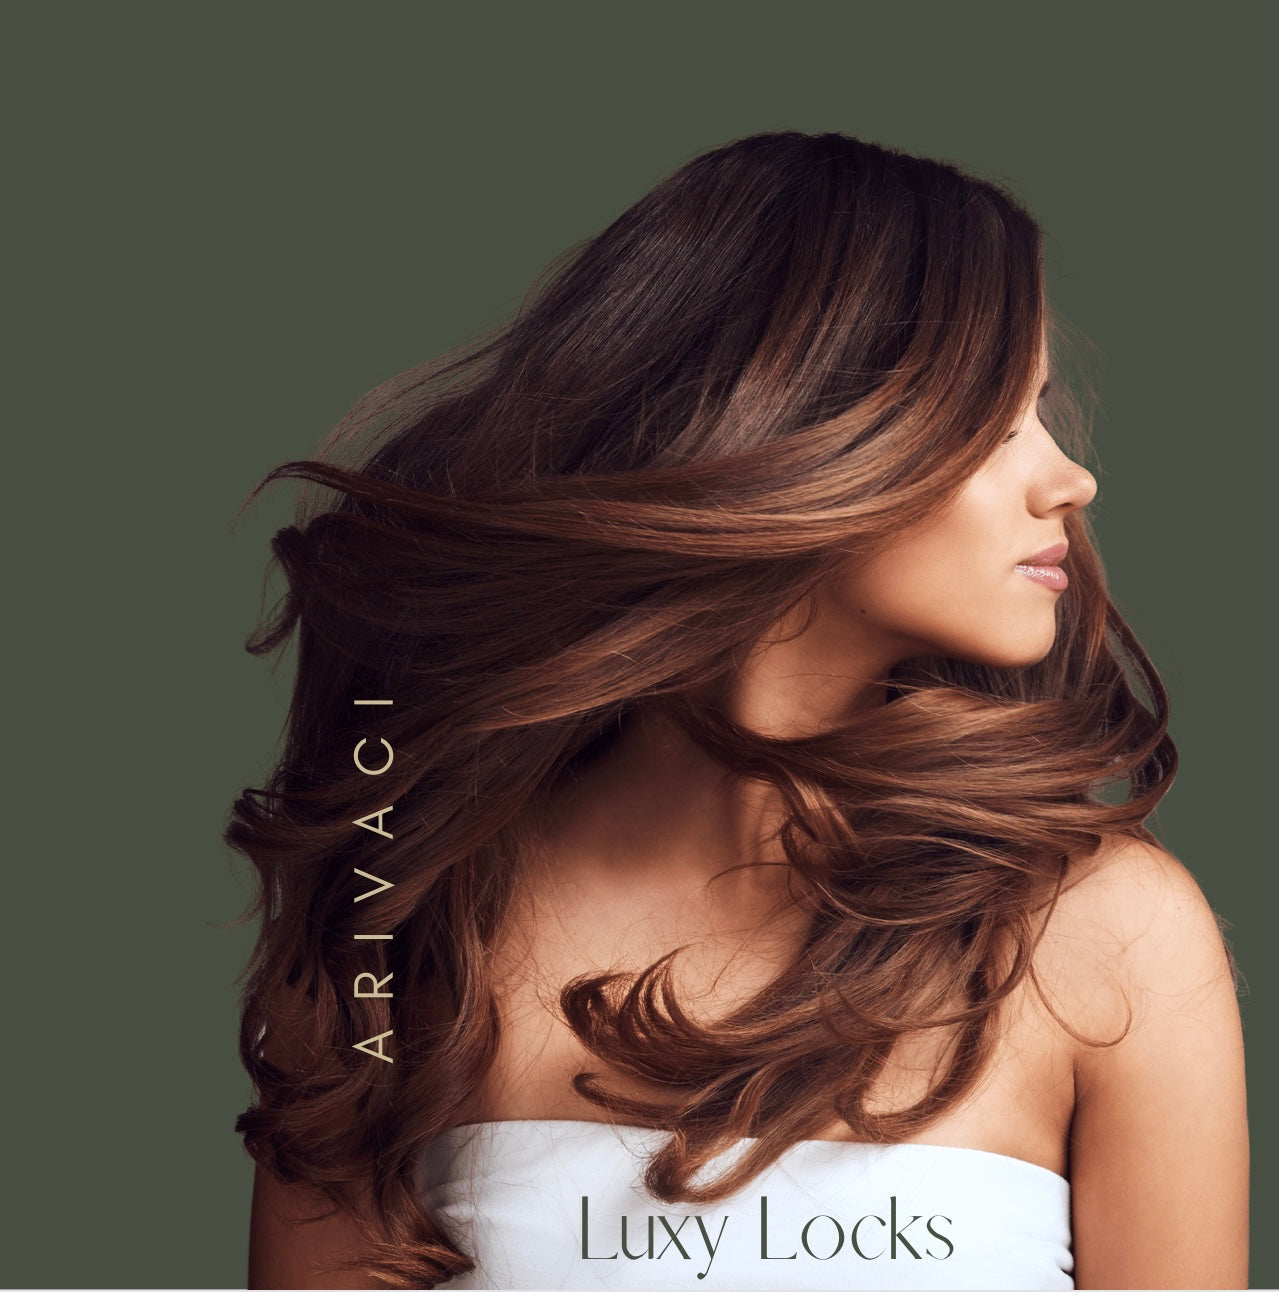 Luxy Locks for Lusterous, Thick Hair - Three Bottles at 50% Savings!